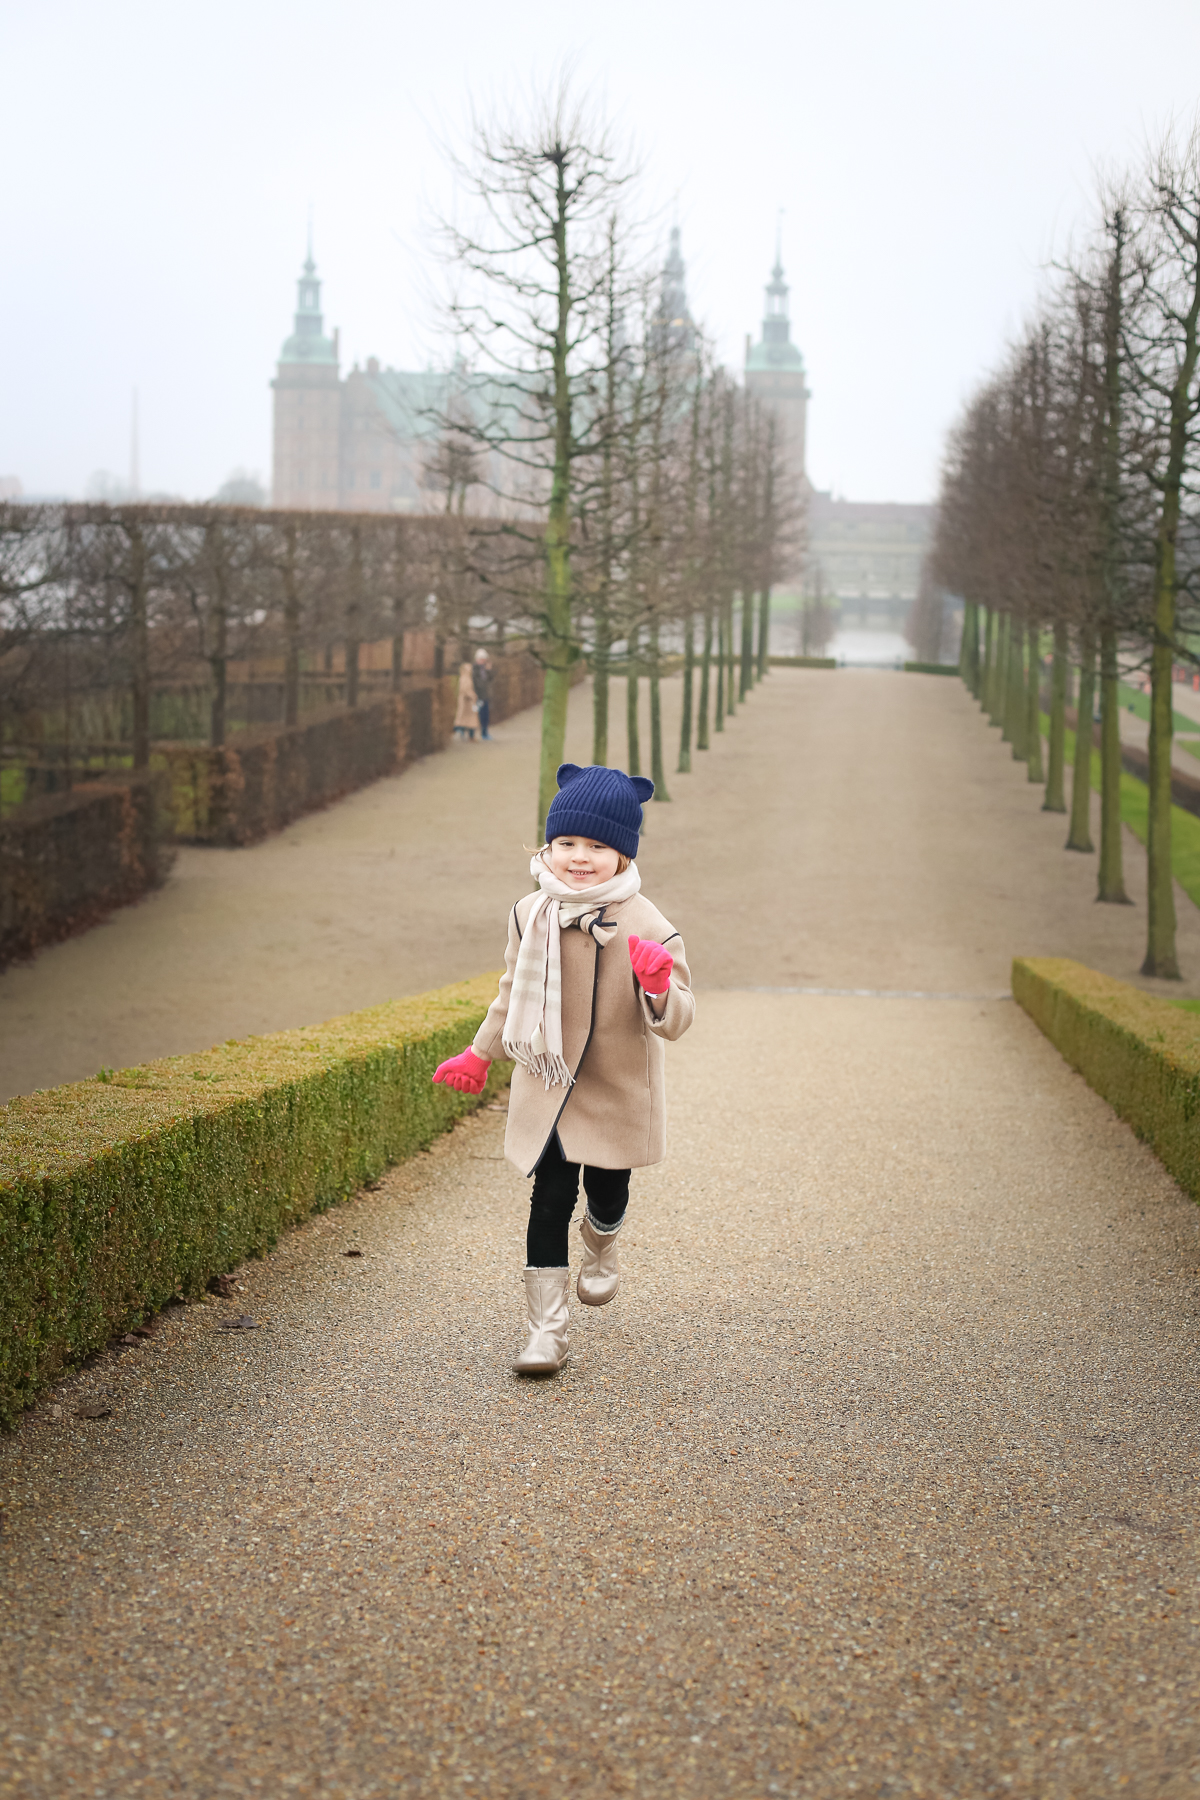 Visiting the Frederiksborg Castle in Hillerod, Denmark, home to the one of the Museum's of National History.